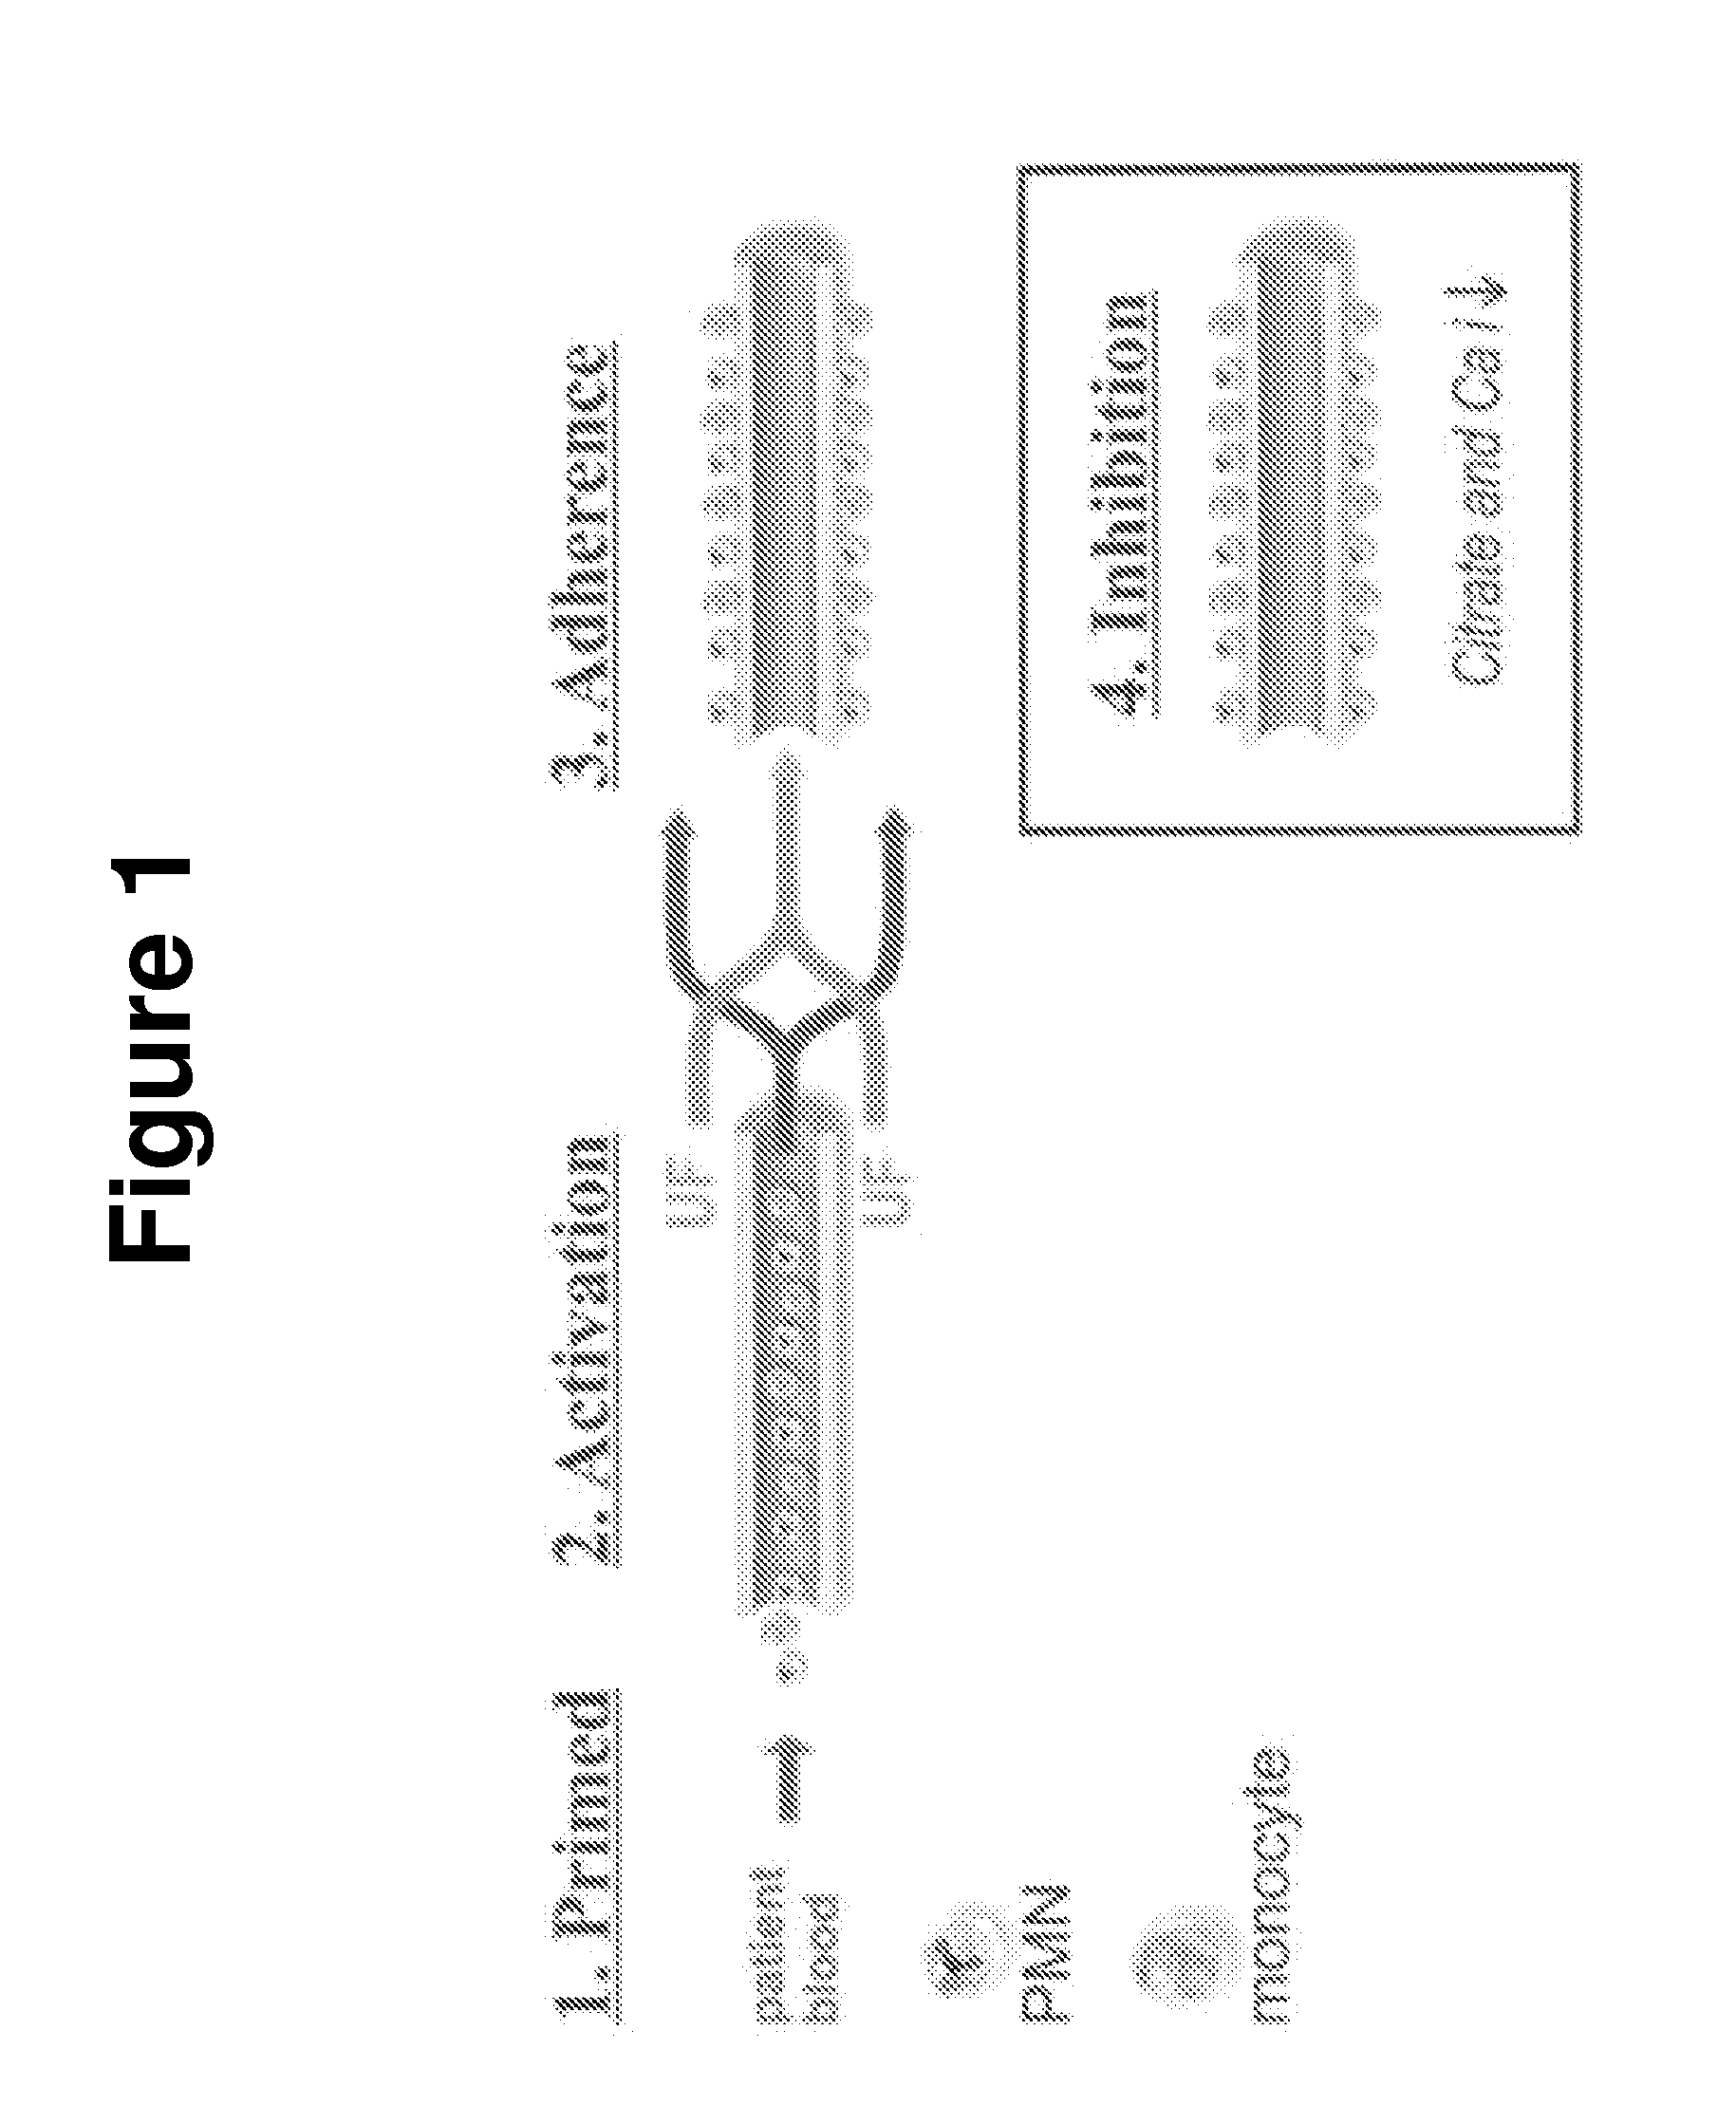 Selective cytopheresis devices and related methods thereof